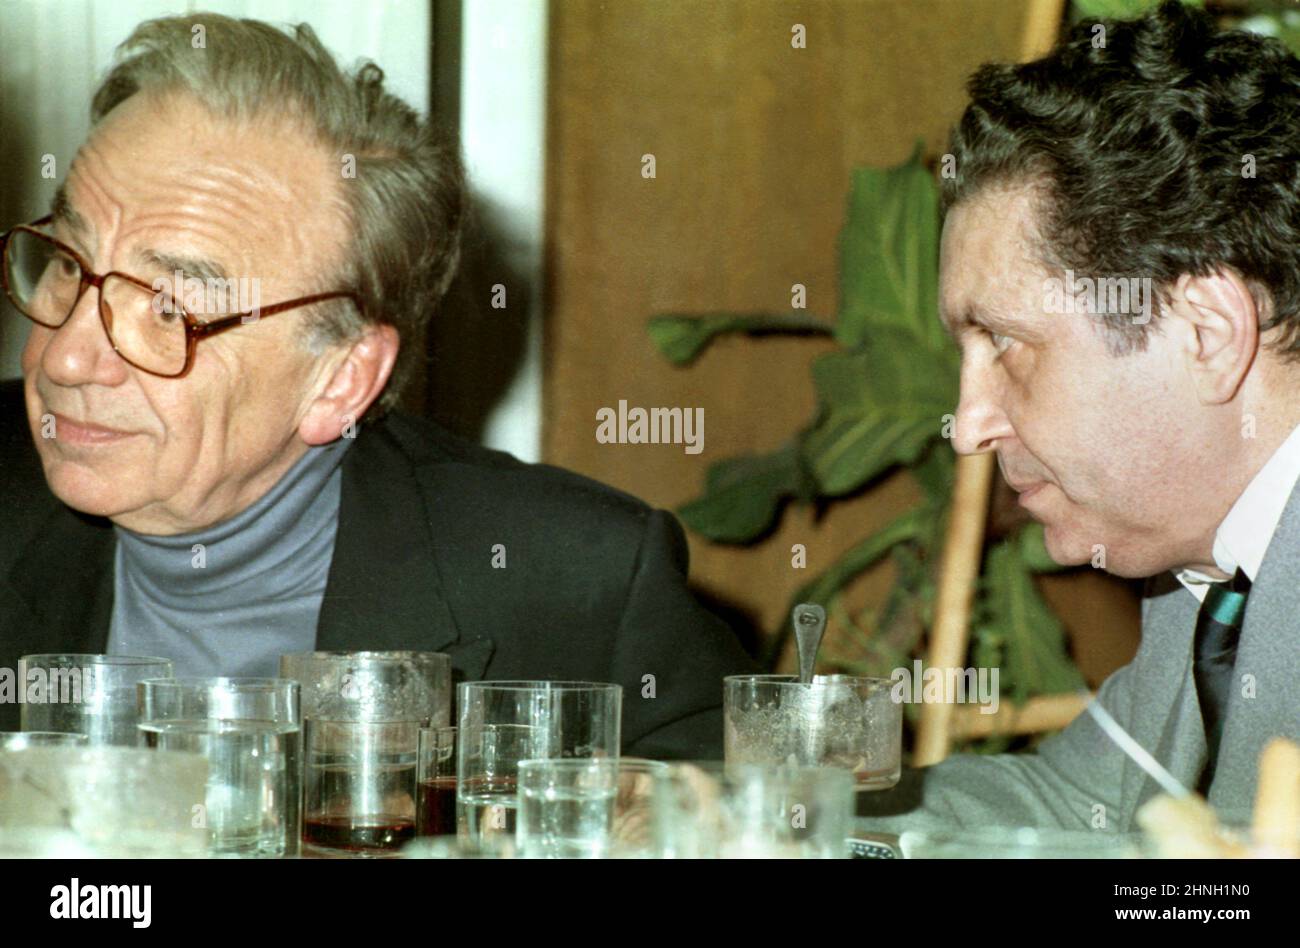 Bucharest, Romania, 1990. Australian- American business magnate Rupert Murdoch with Romanian author & director of the Romanian Television Aurel Dragoș Munteanu (right), soon after the fall of communism. Stock Photo